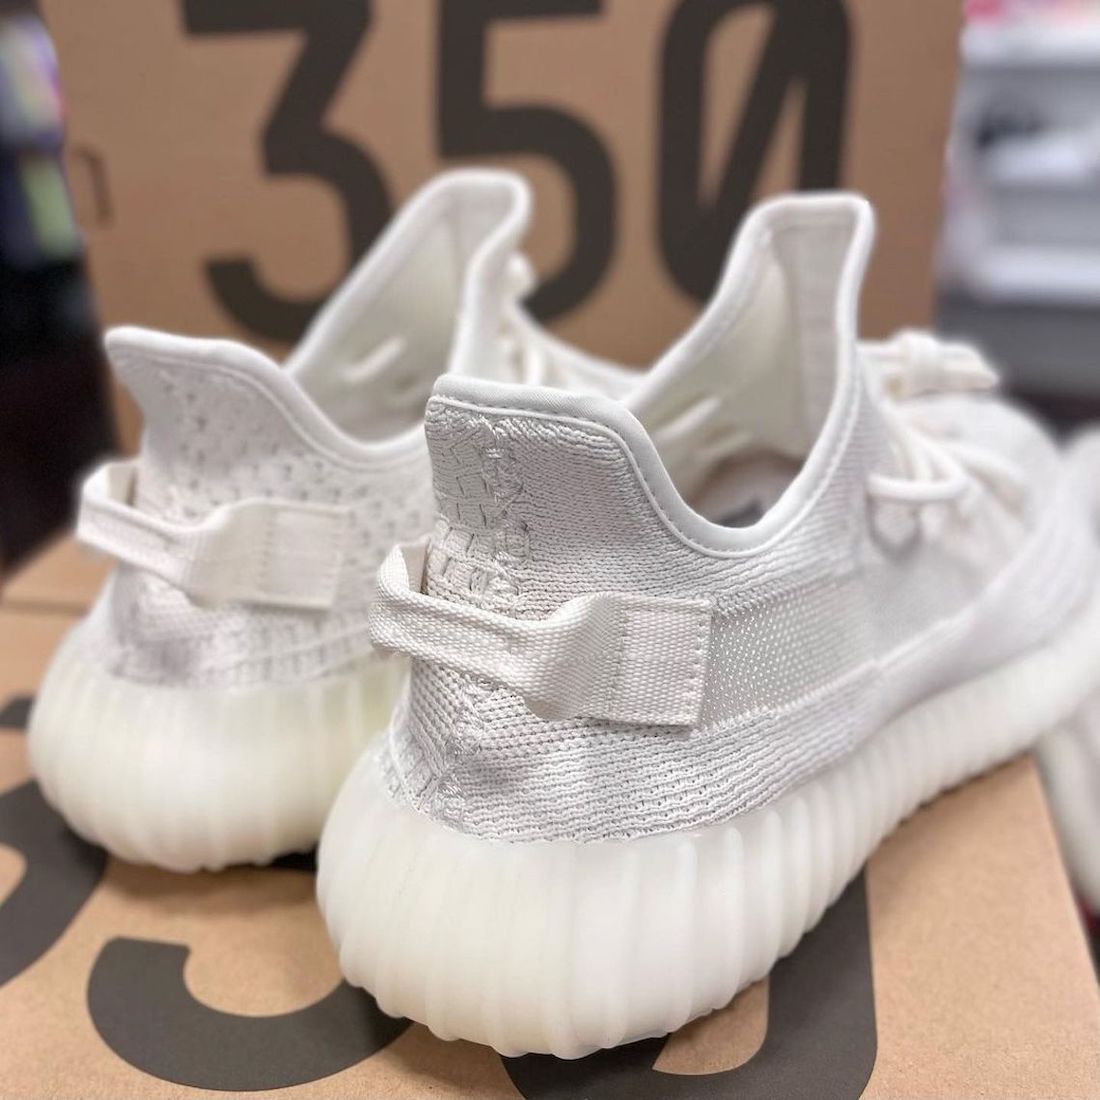 adidas yeezy boost 350 v2 pure oat release Date price 2